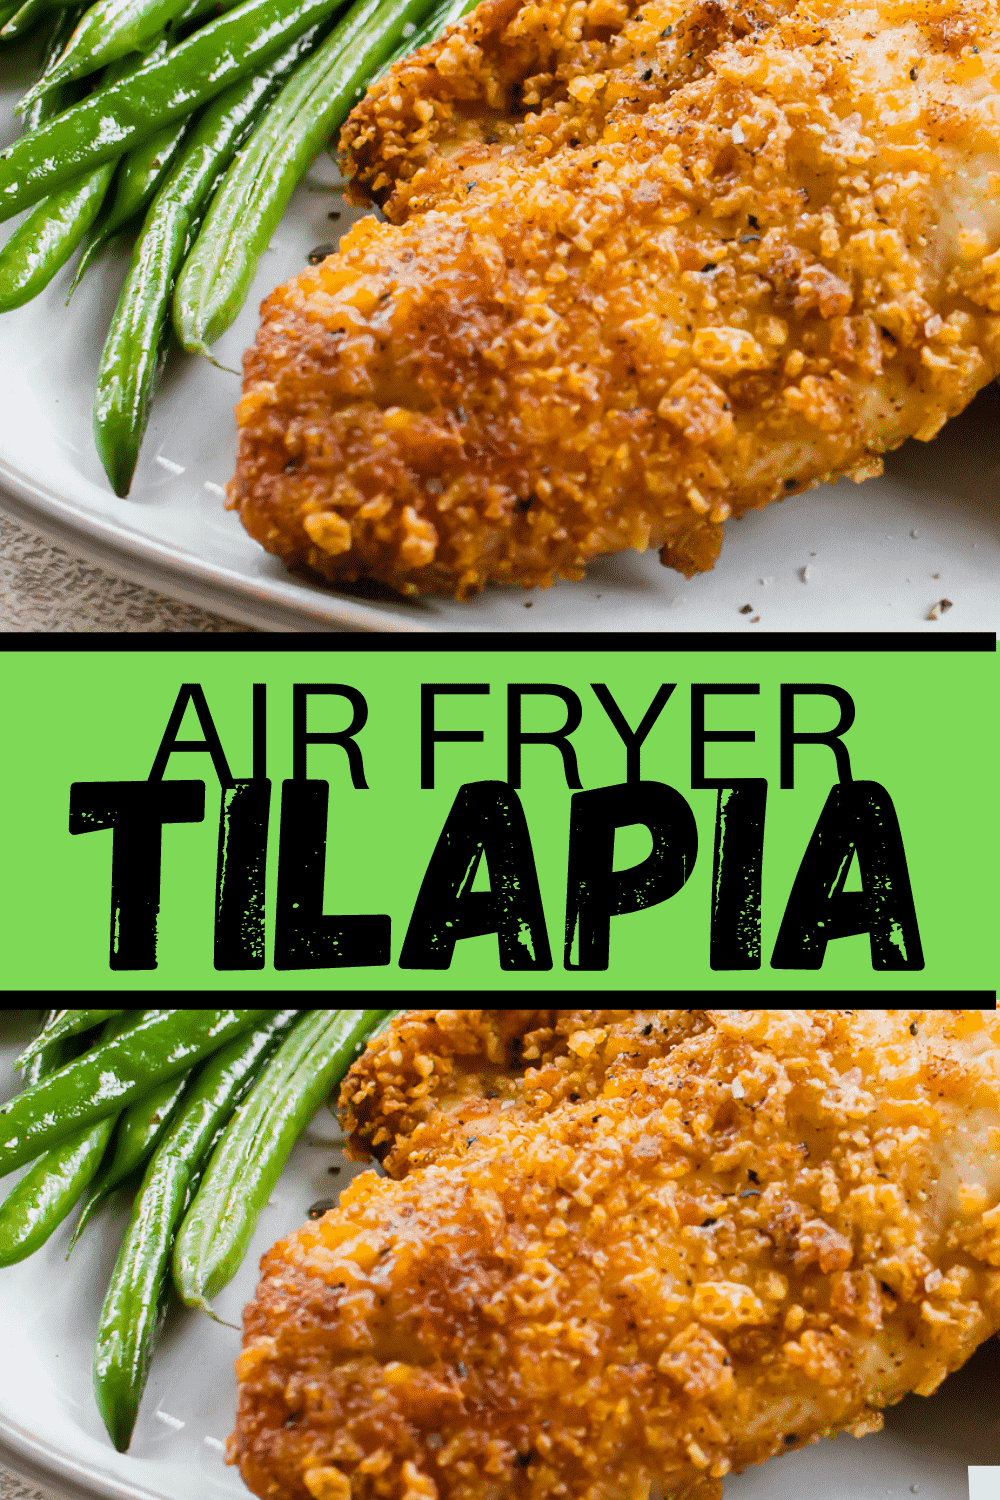 Air Fryer Tilapia is so fast and flaky! Coat this yummy white fish in seasoned breadcrumbs for a quick fish dinner with pantry staples. #airfryertilapia #airfryerfish #tilapia via @vegetarianmamma